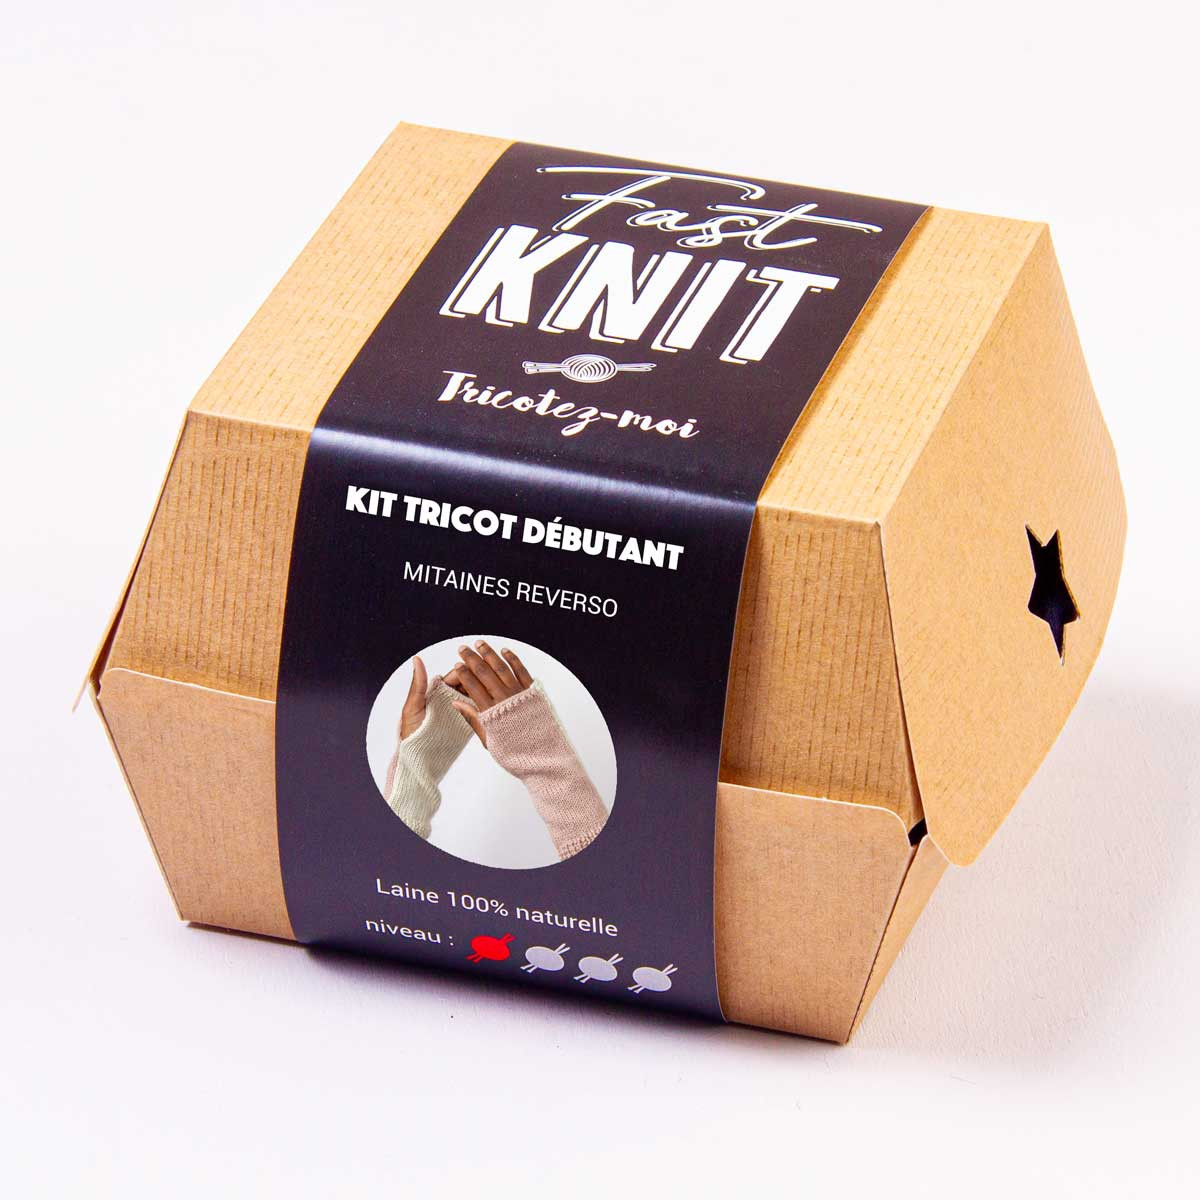 Mitaines Reverso - Fast Knit Box tricot